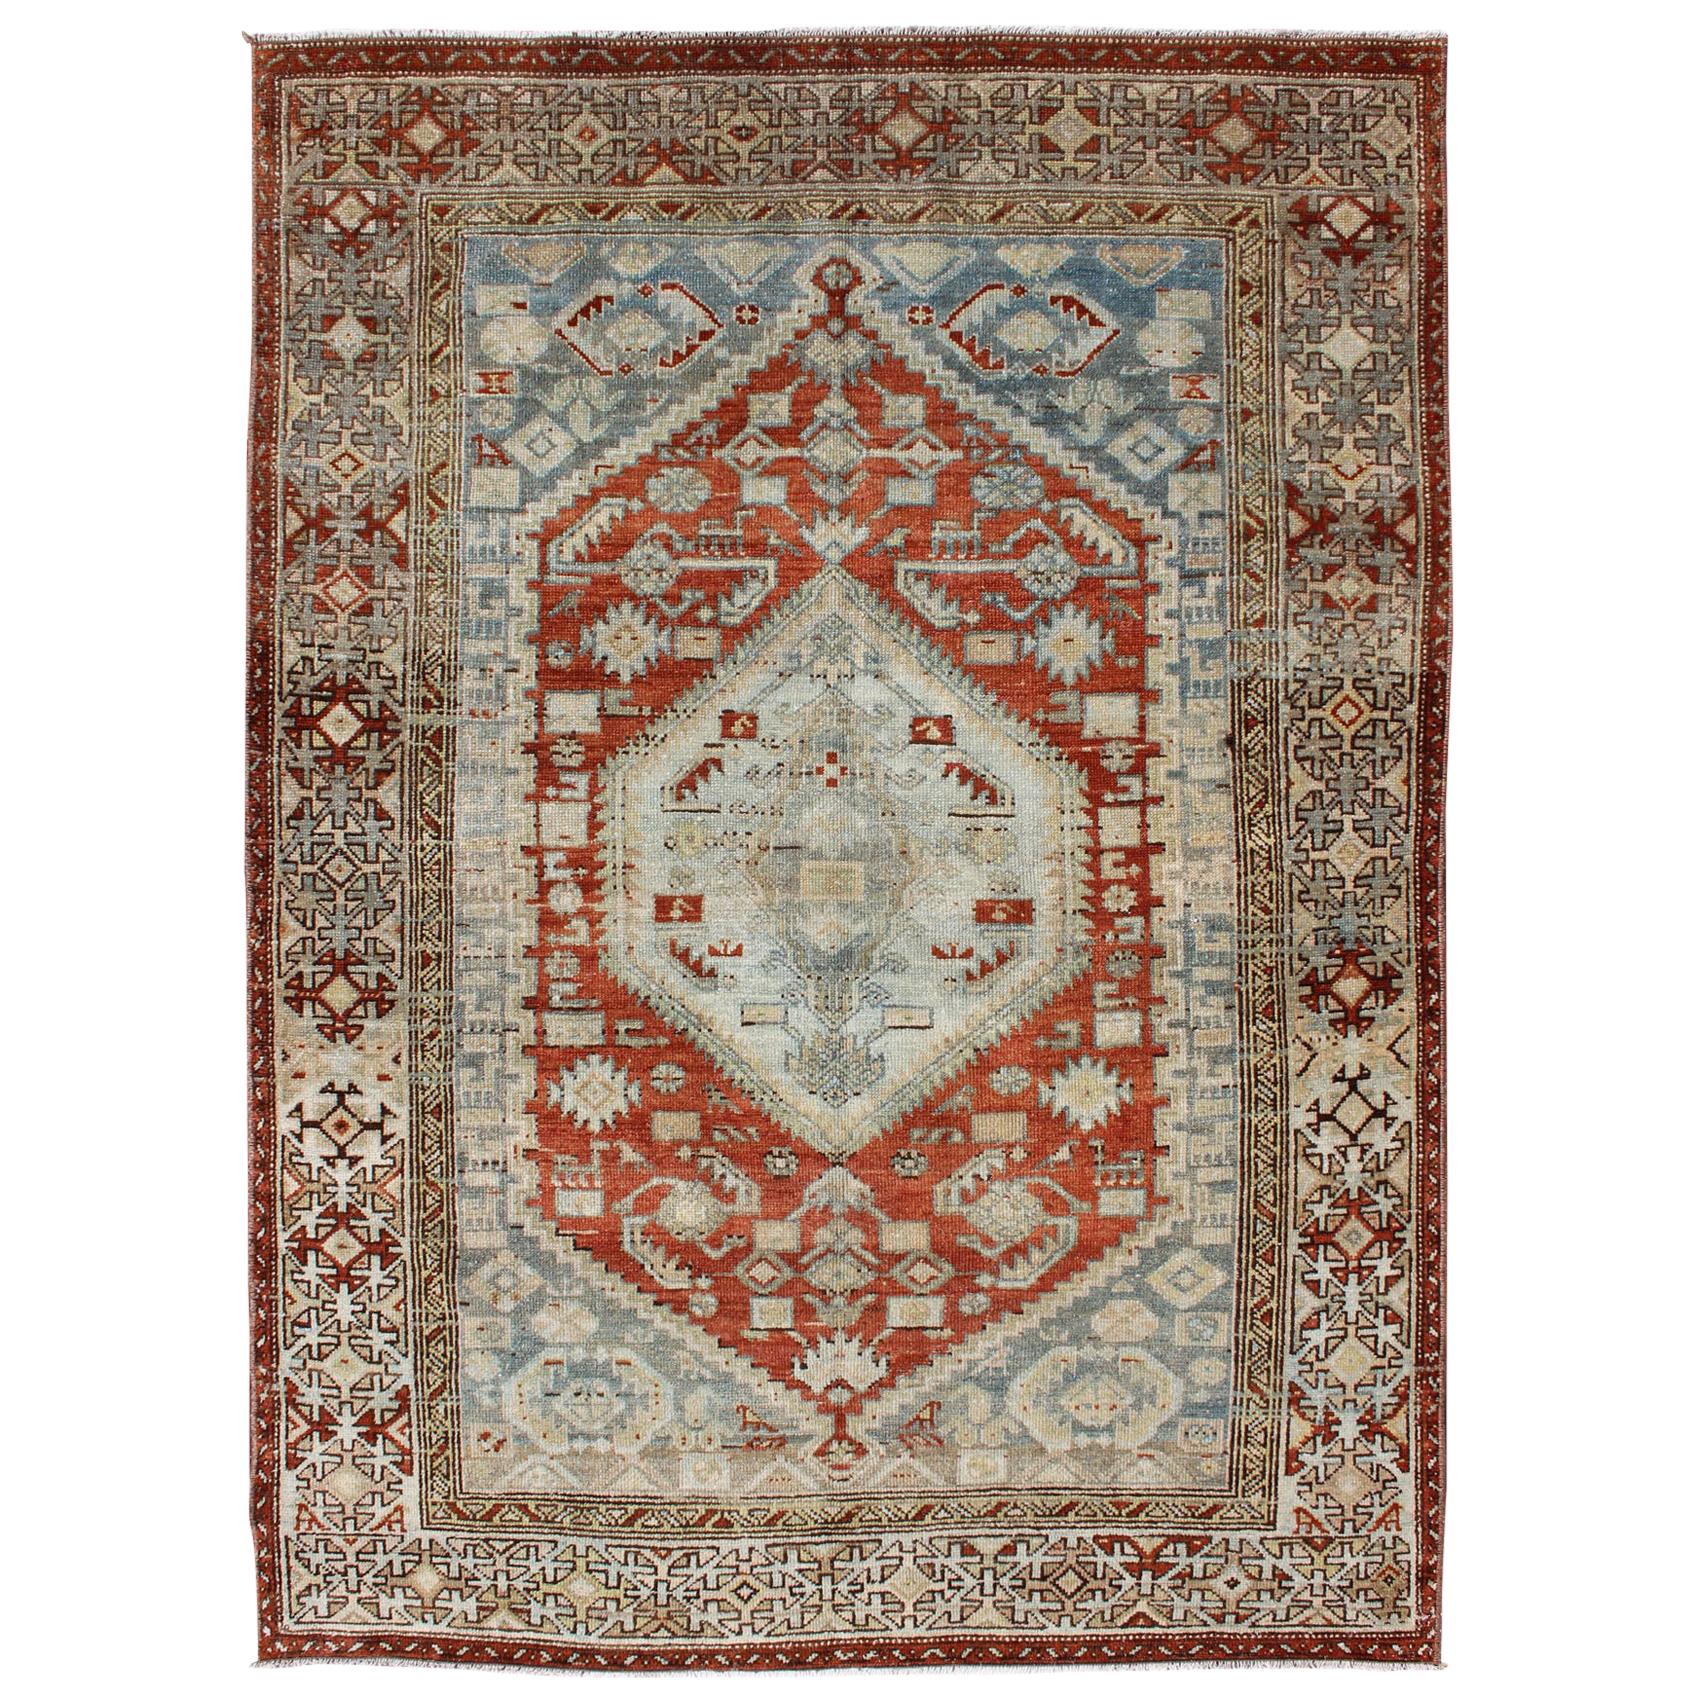 Orange-Red, Light Gray/Blue Antique Persian Malayer Rug with Geometric Design For Sale